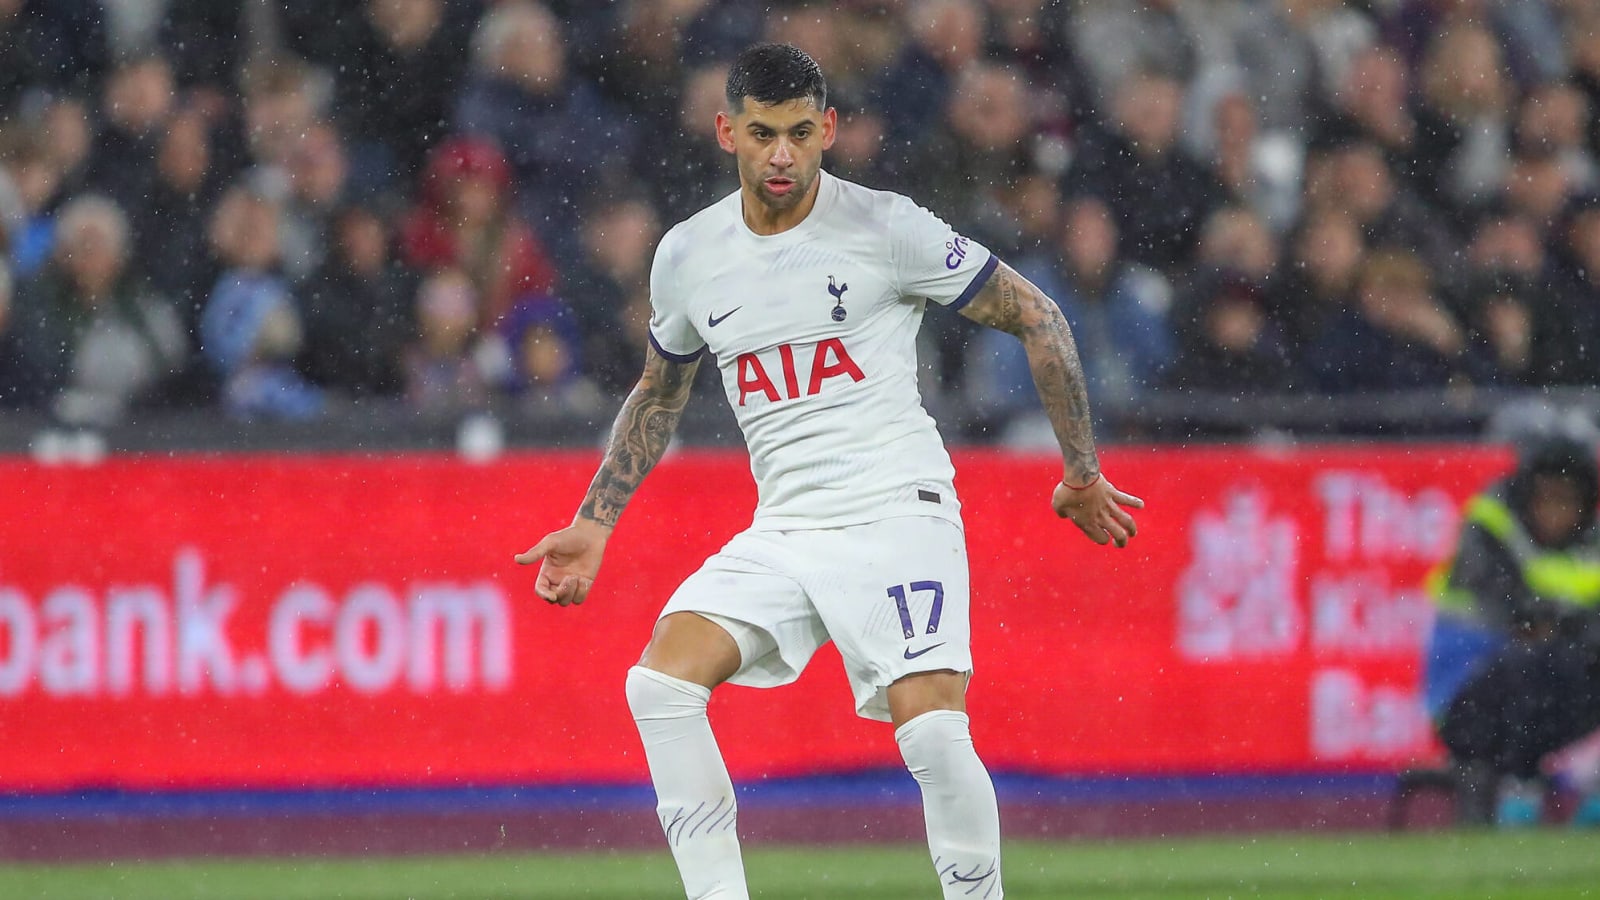 Former Tottenham manager names the player who he thinks has been Spurs’ best player this season